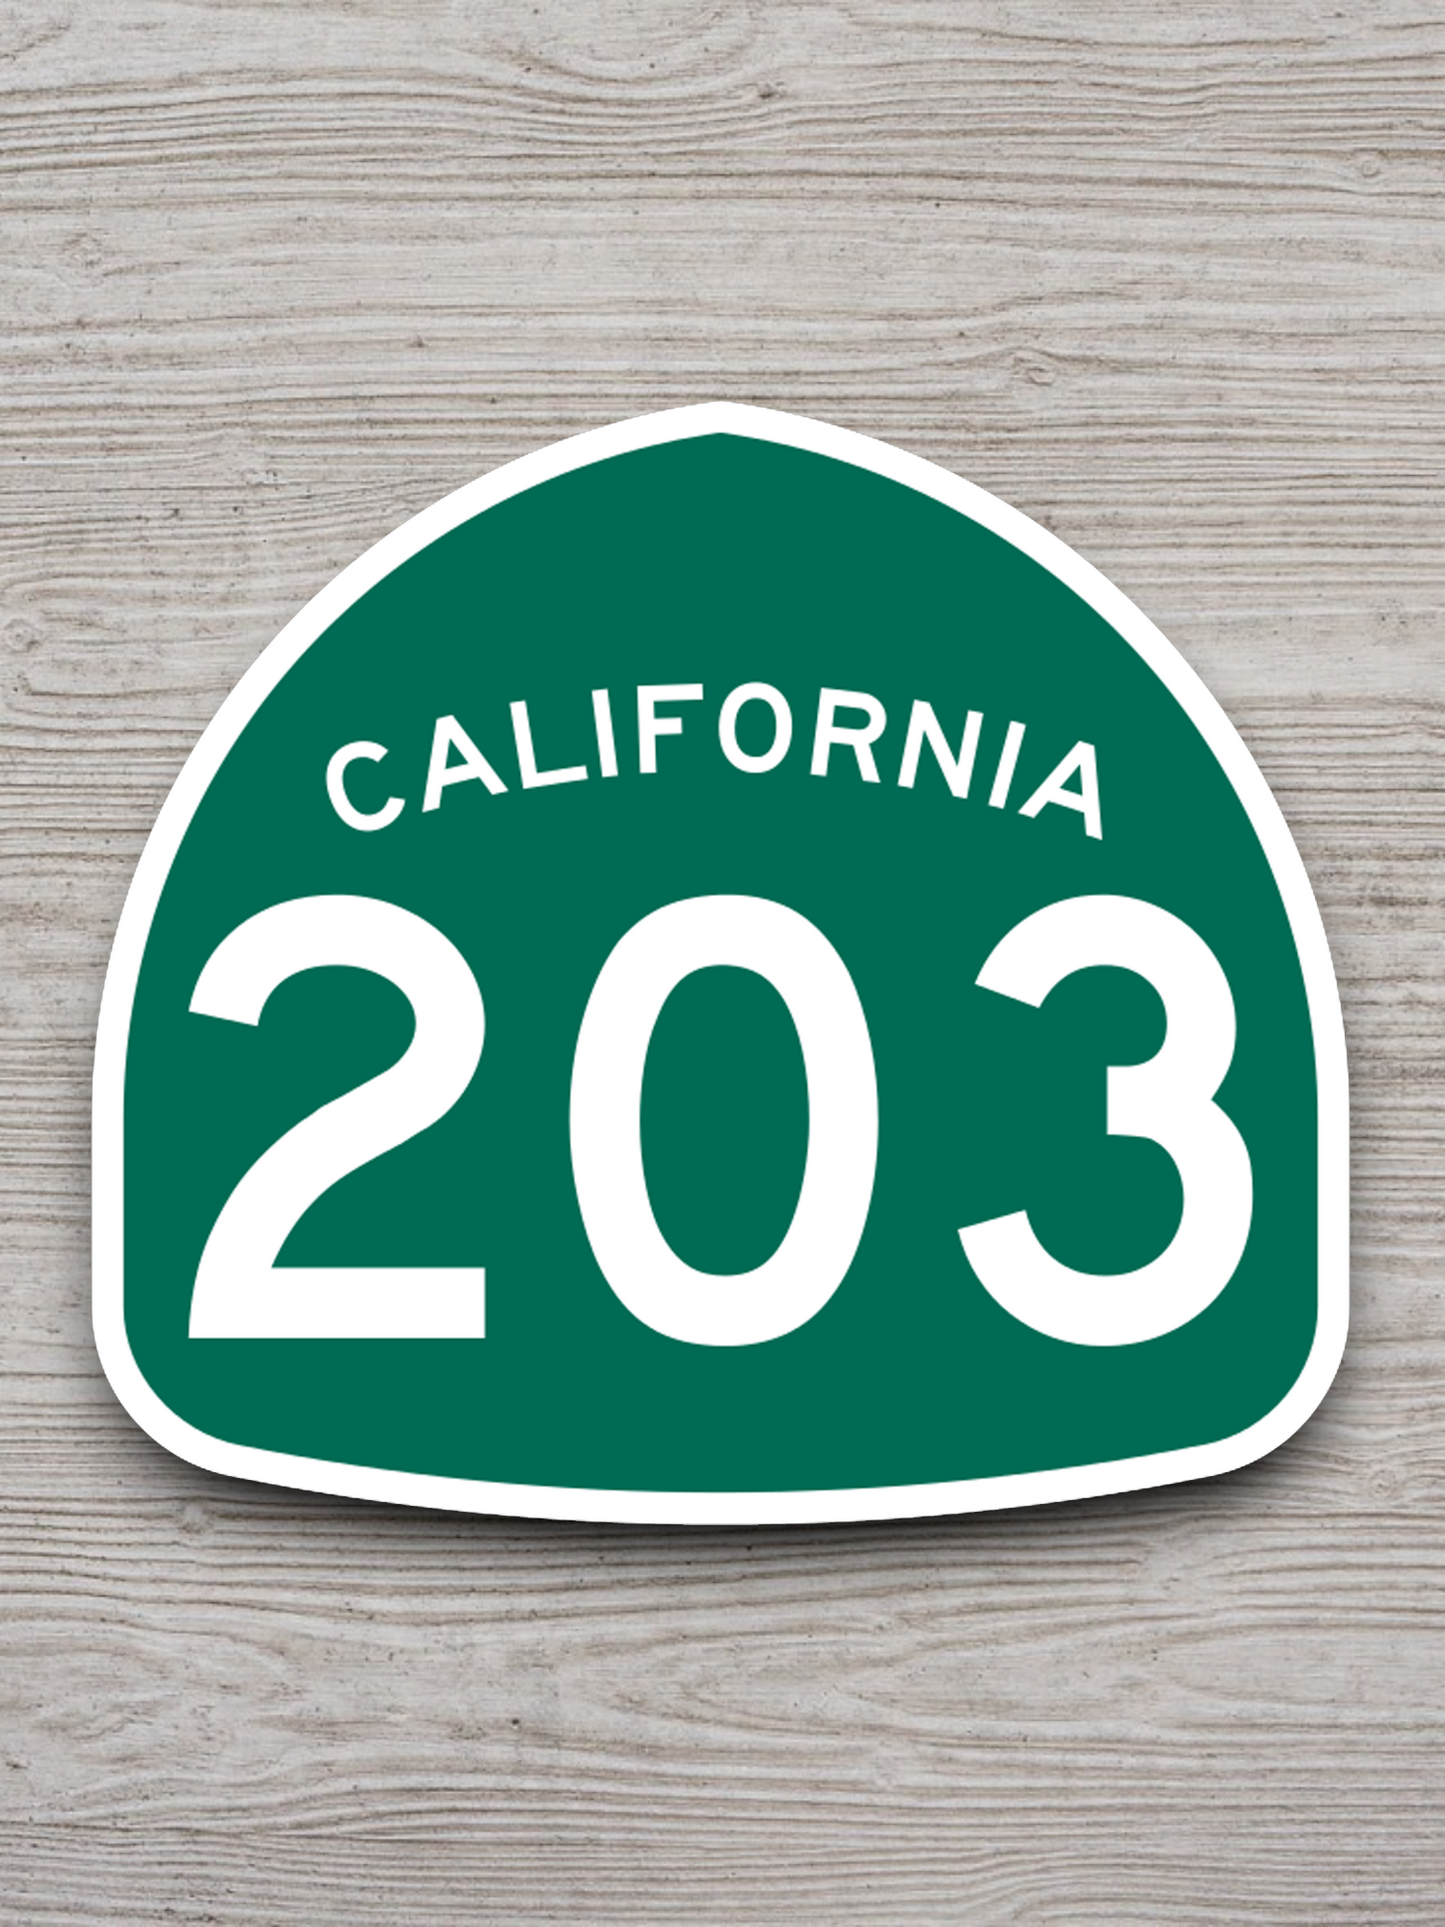 California State Route 203 Road Sign Sticker